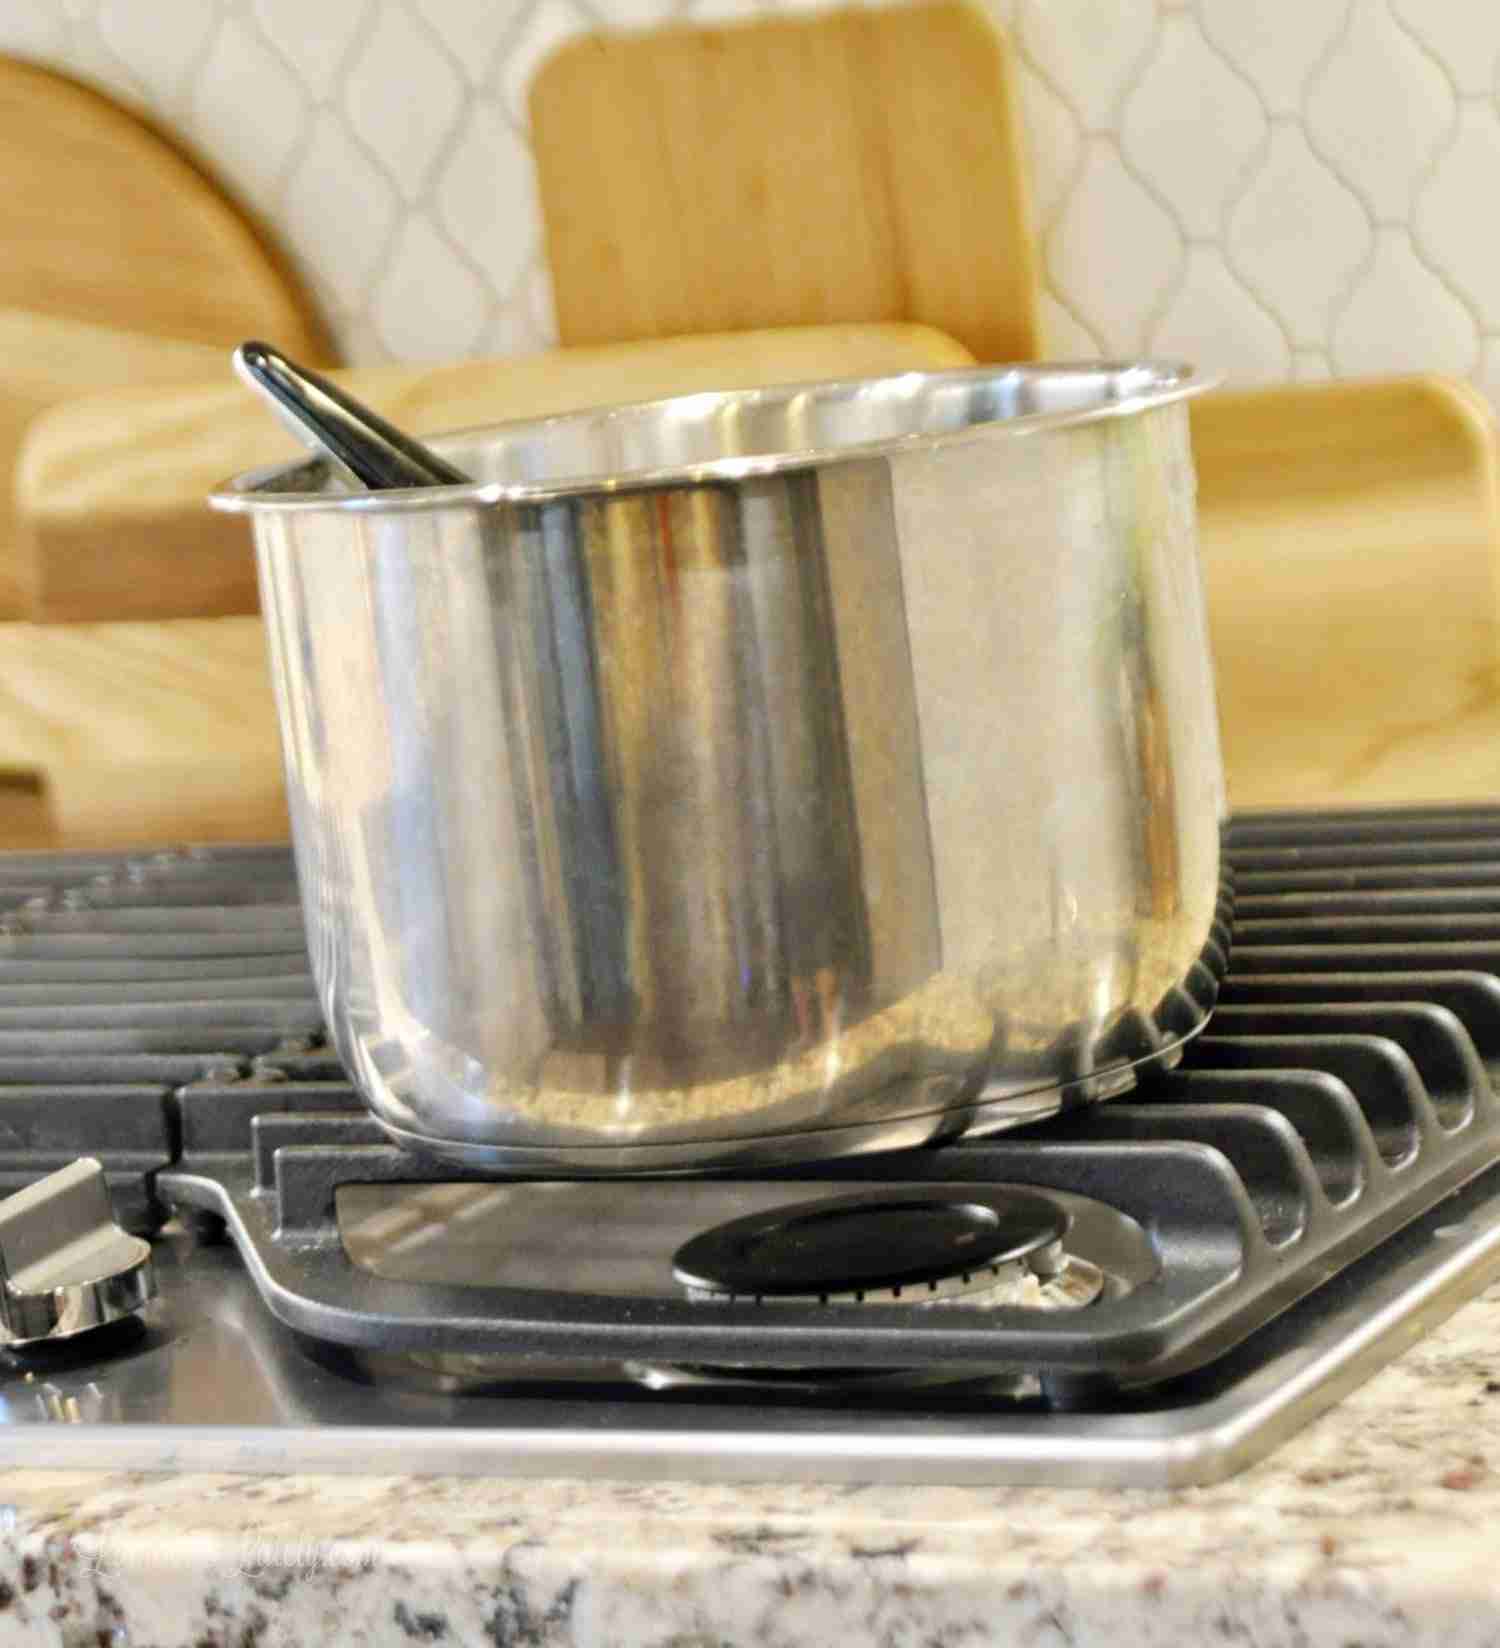 Inner pot from Instant Pot cooling on a stove grate